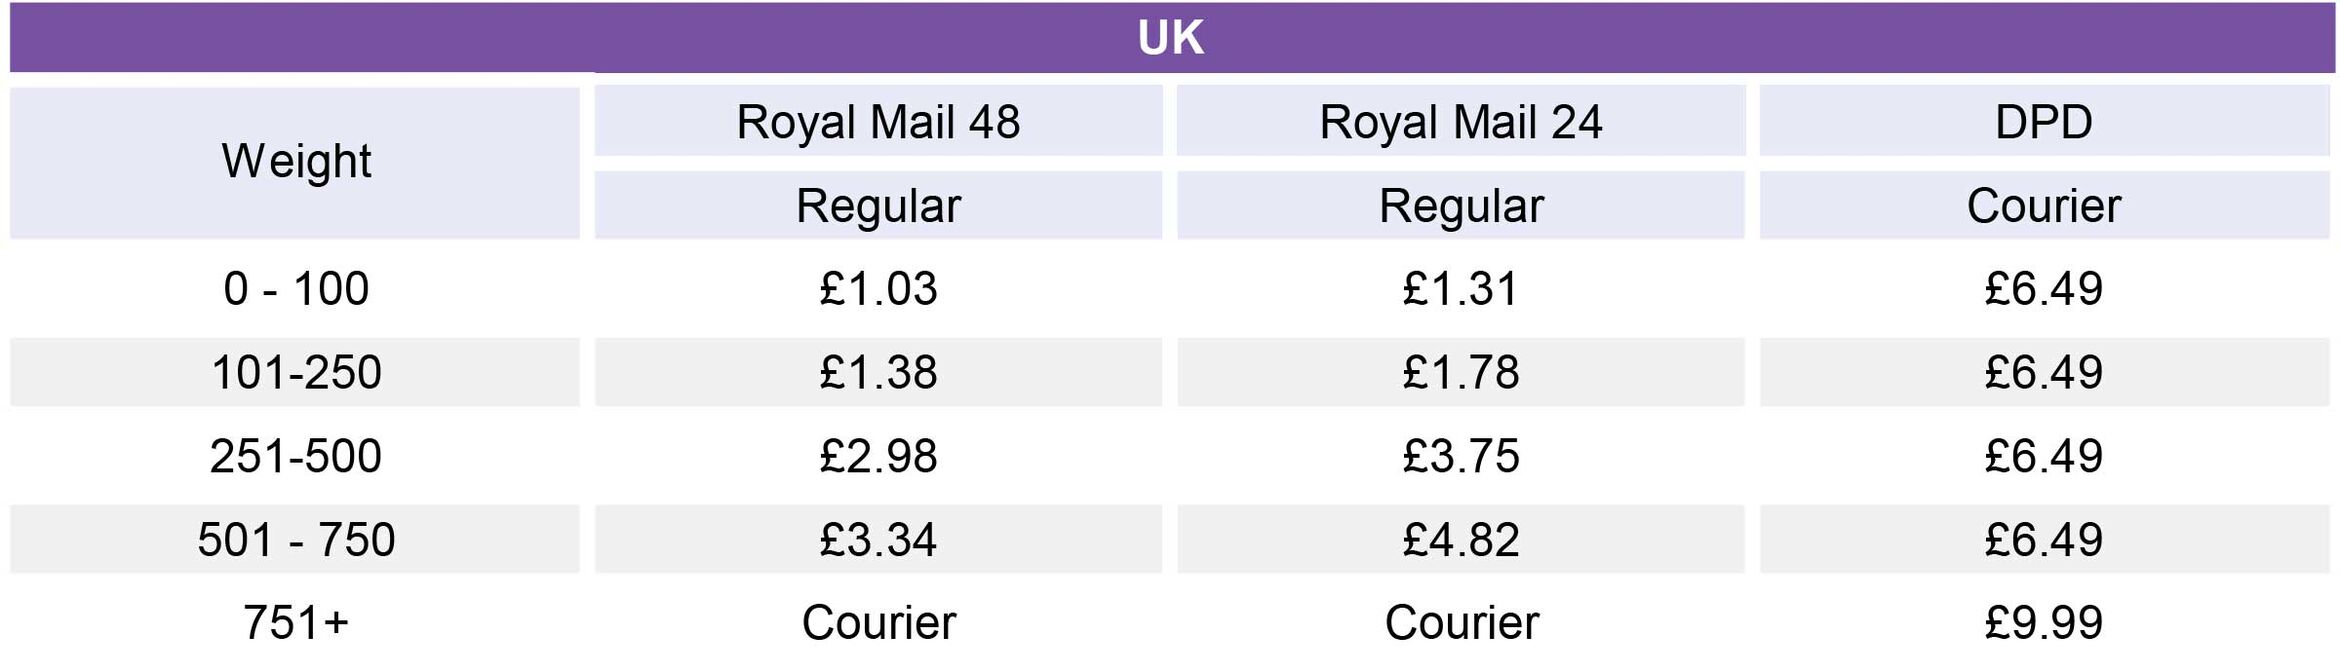 UK-Shipping-Costs